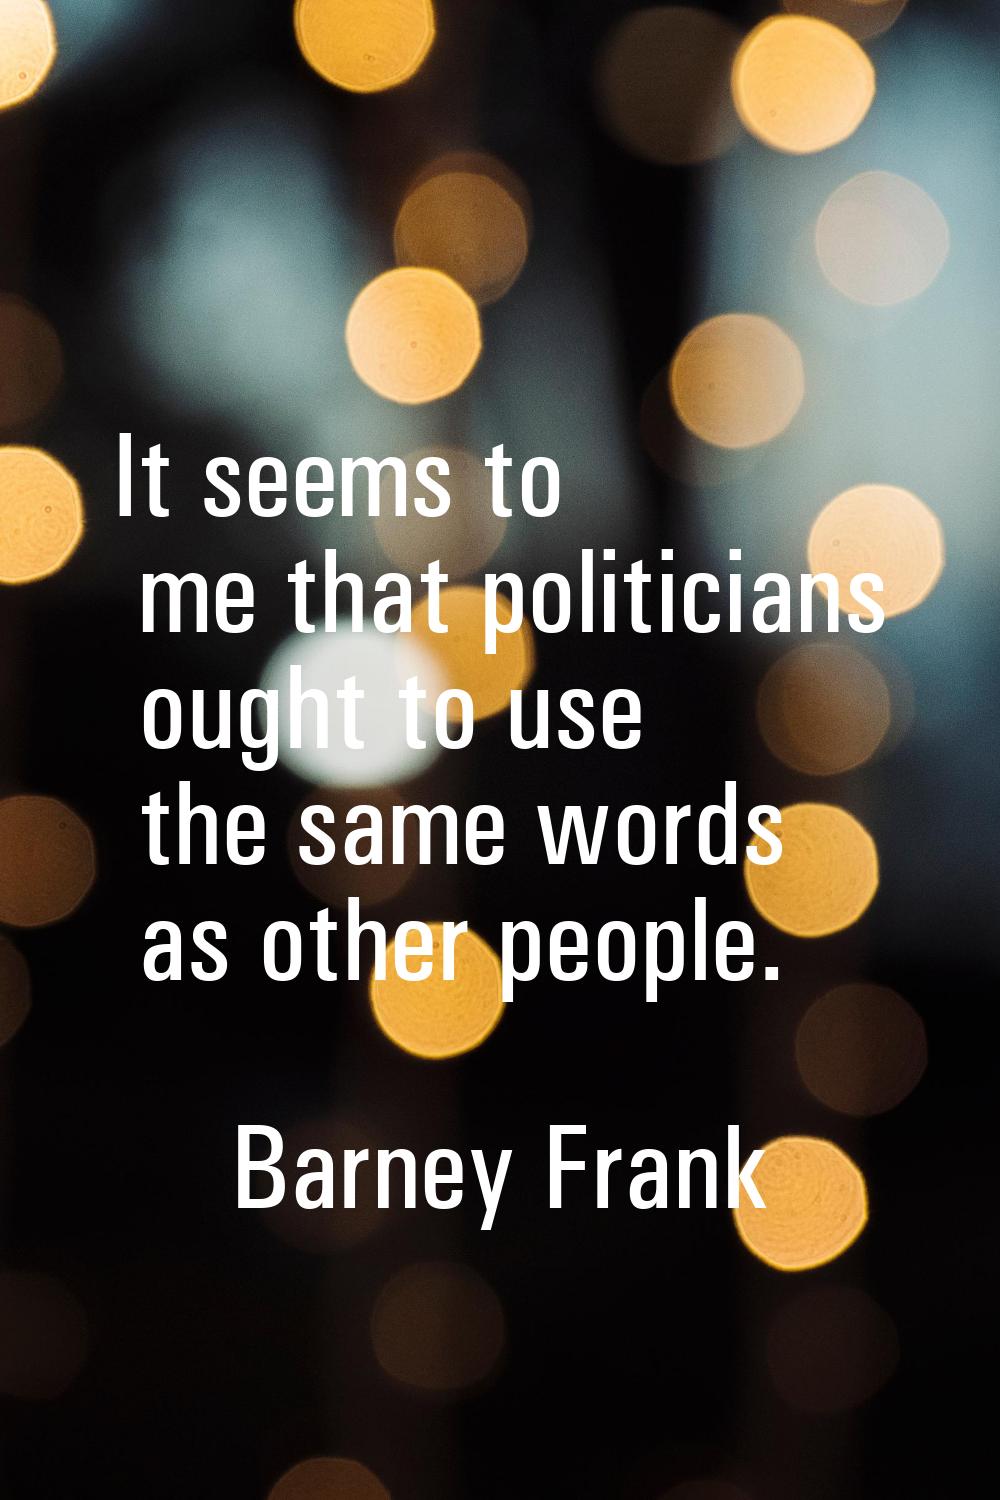 It seems to me that politicians ought to use the same words as other people.